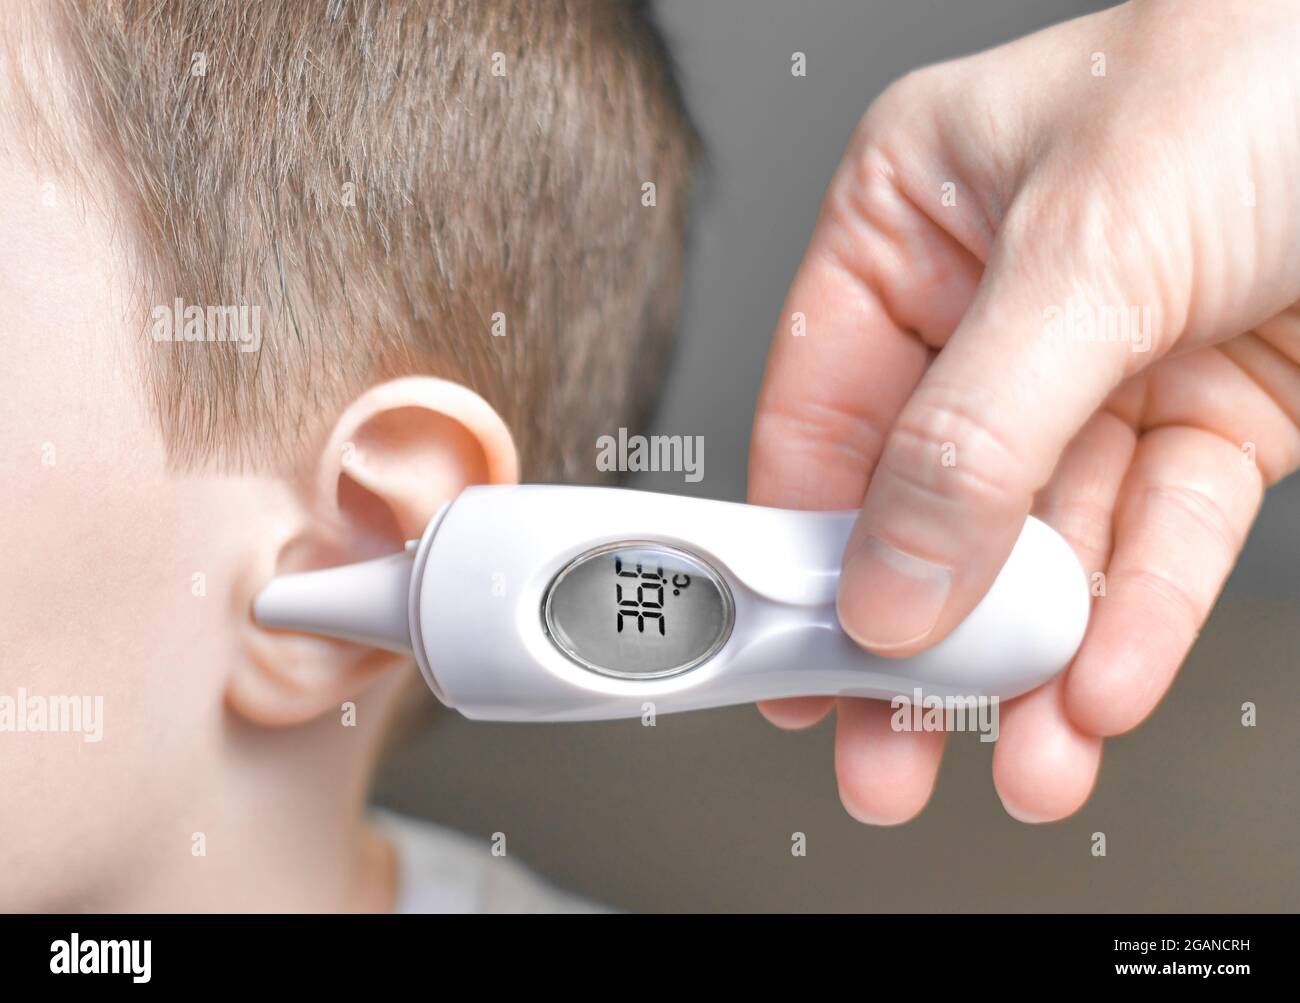 https://c8.alamy.com/comp/2GANCRH/measurement-of-body-temperature-with-a-digital-thermometer-in-the-auricle-2GANCRH.jpg